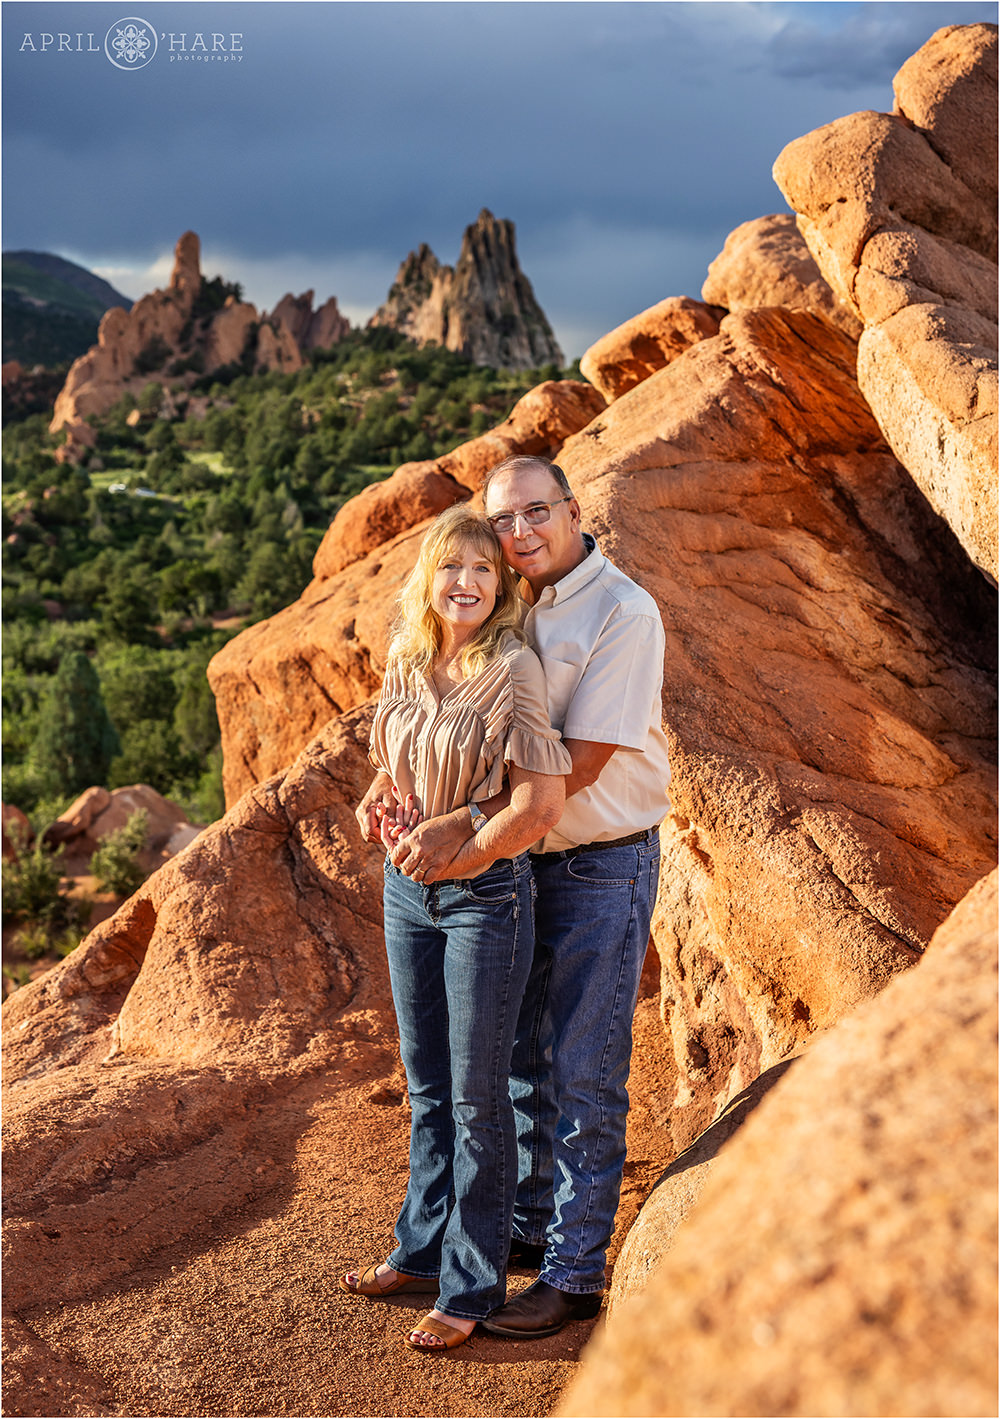 Couples portrait on a bright sunny day in Colorado at High Point Overlook in Garden of the Gods Colorado Springs